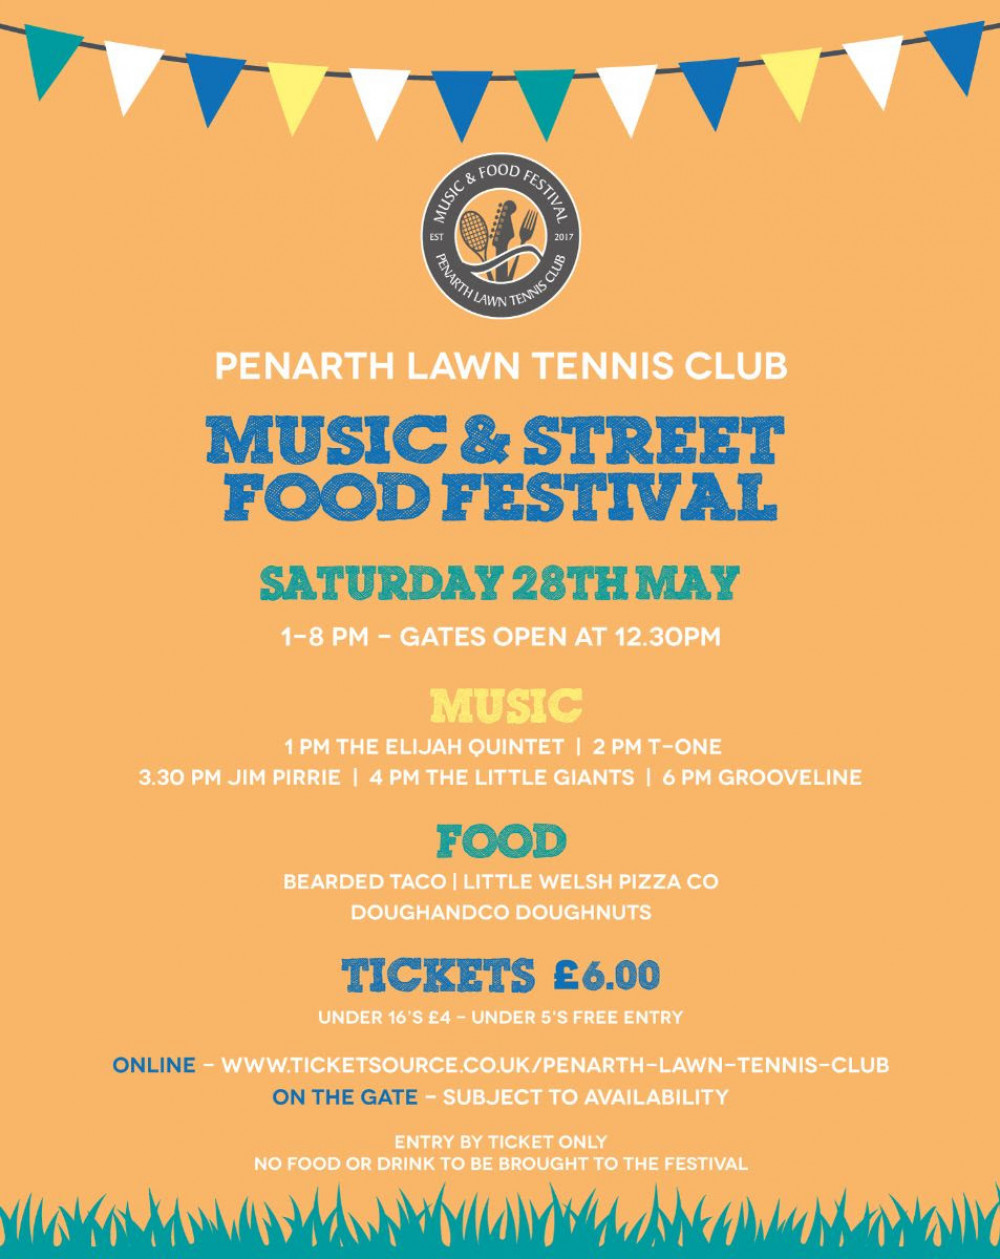 It's predicted up to 1,200 people will attend the festival on May 28. (Image credit: Penarth Lawn Tennis Club)